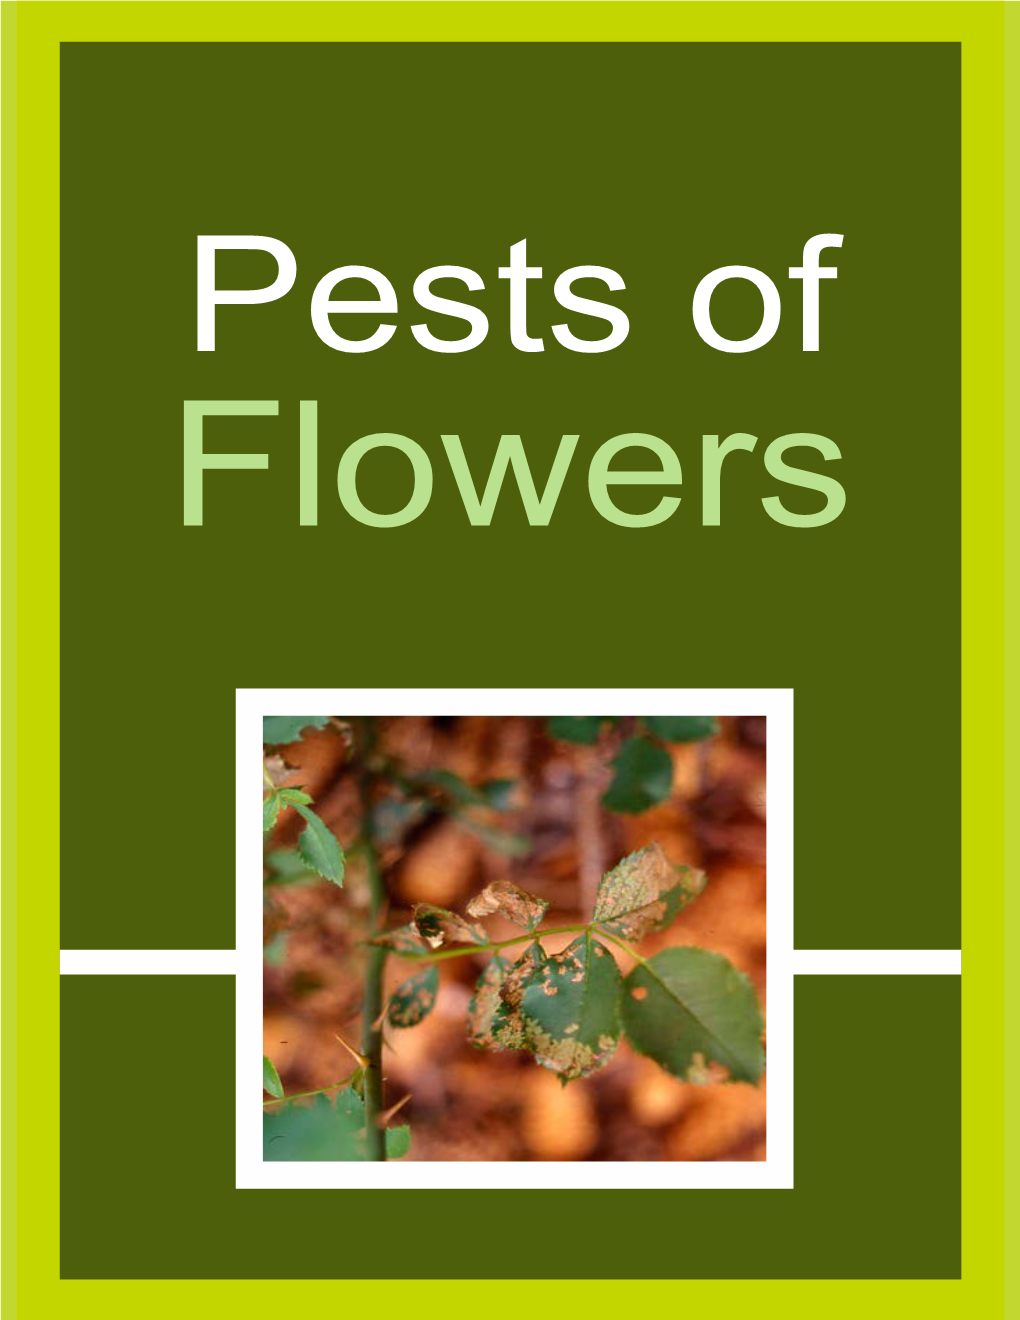 Pests of Flowers